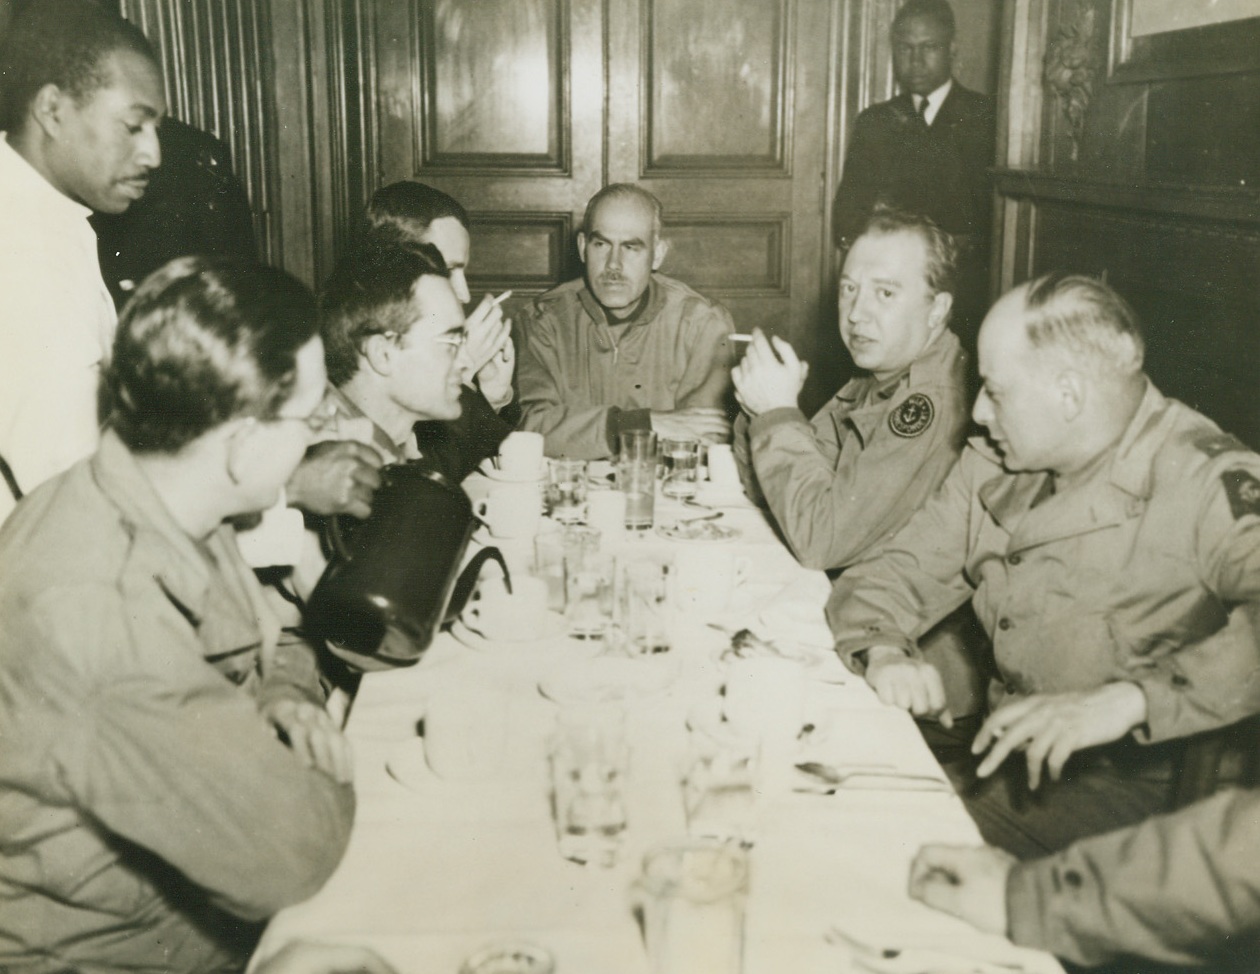 Correspondents Dig In – That’s Chow, 6/23/1944. England – War Correspondent’s who have covered the naval aspects of the invasion get together at a port somewhere in England for chow with Col. Ernest Depuis (center) of the Supreme Allied Headquarters staff. The correspondents are (left to right): Tom Wolf, of NEA; Peter Whitney, of the San Francisco Chronicle; R.L. Strout, of the Christian Science Monitor; Fred Sondern, Jr., of the Reader’s Digest; and Marcel Wallenstein, of the Kansas City Star. Credit: US Navy Photo from ACME;